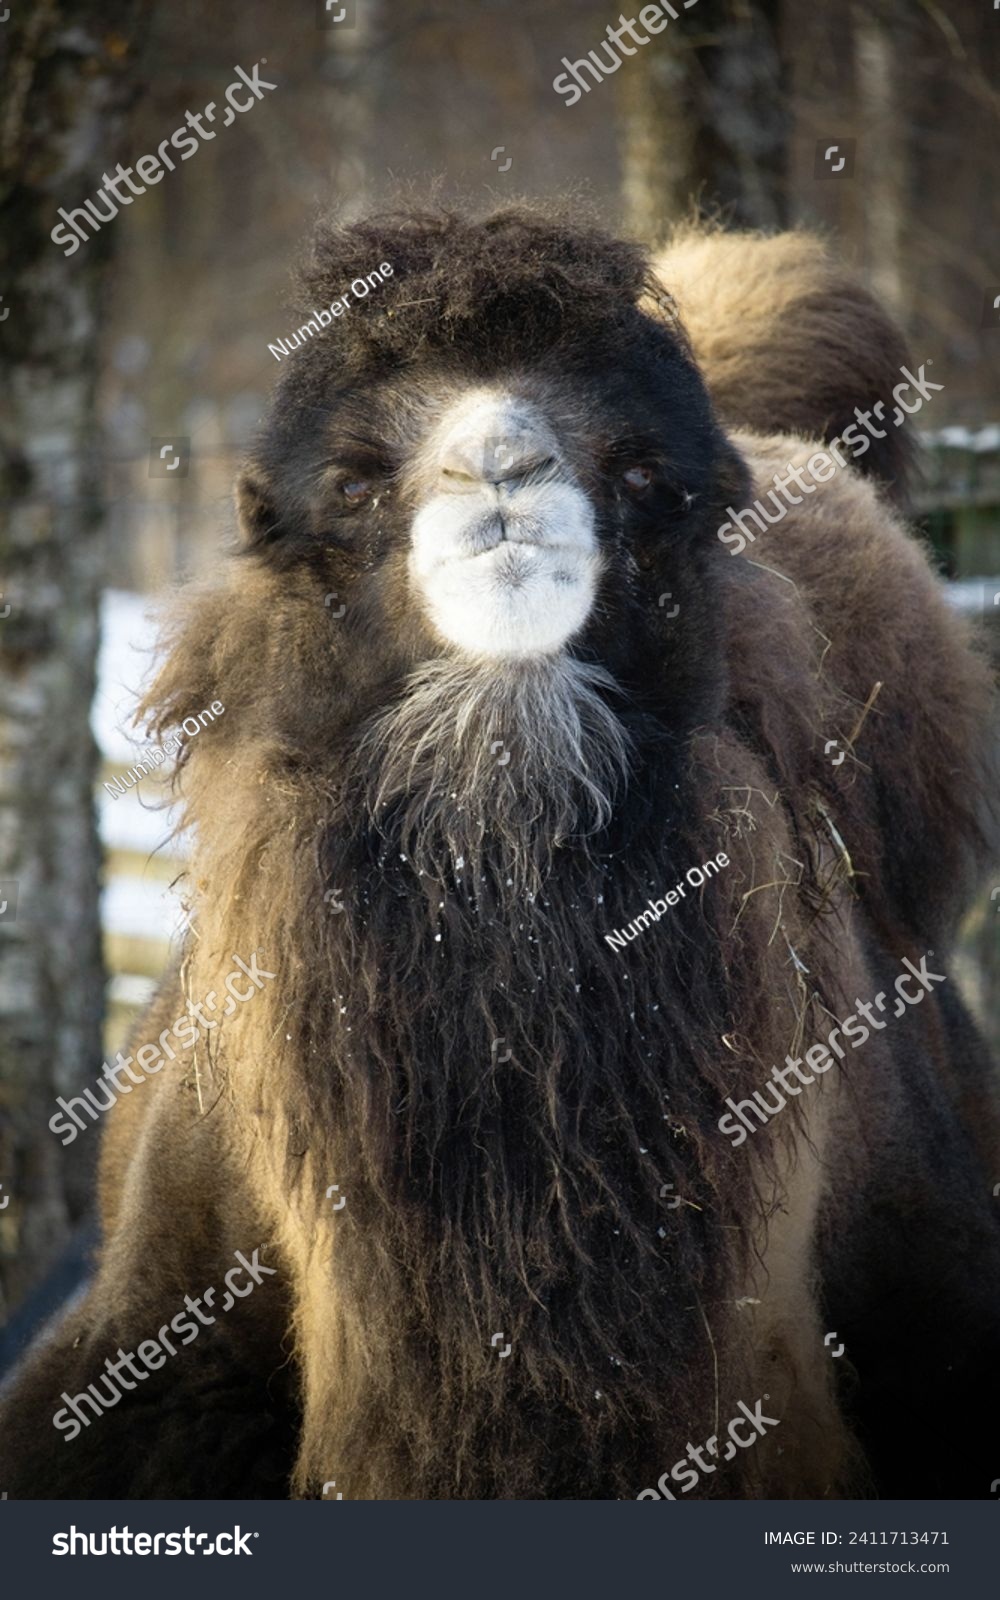 Bactrian camel. Two humped camel approaches the man. camel in the snow in winter. Camelus bactrianus. #2411713471